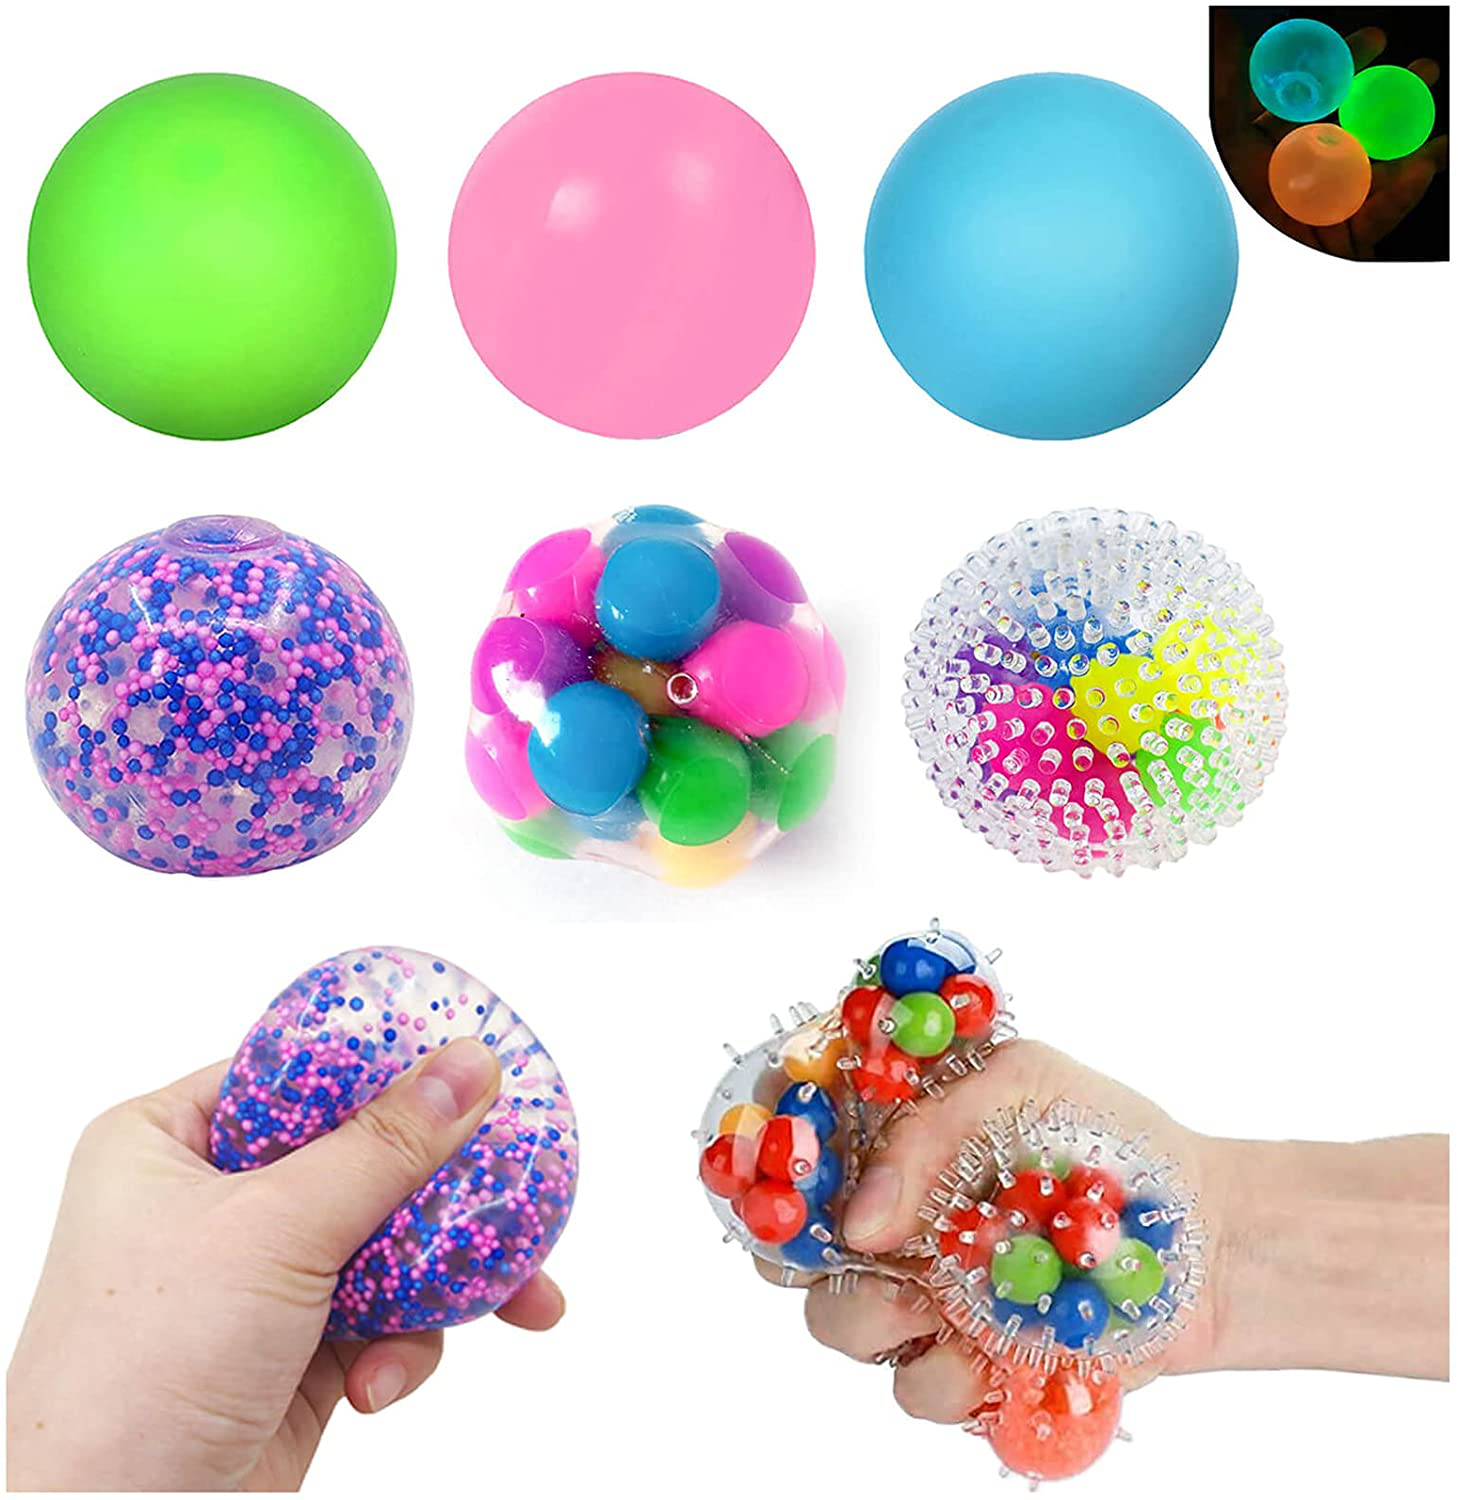 1 pcs New Sensory Stress Reliever Ball Toy Autism Squeeze Fidget Anxiety NEW 